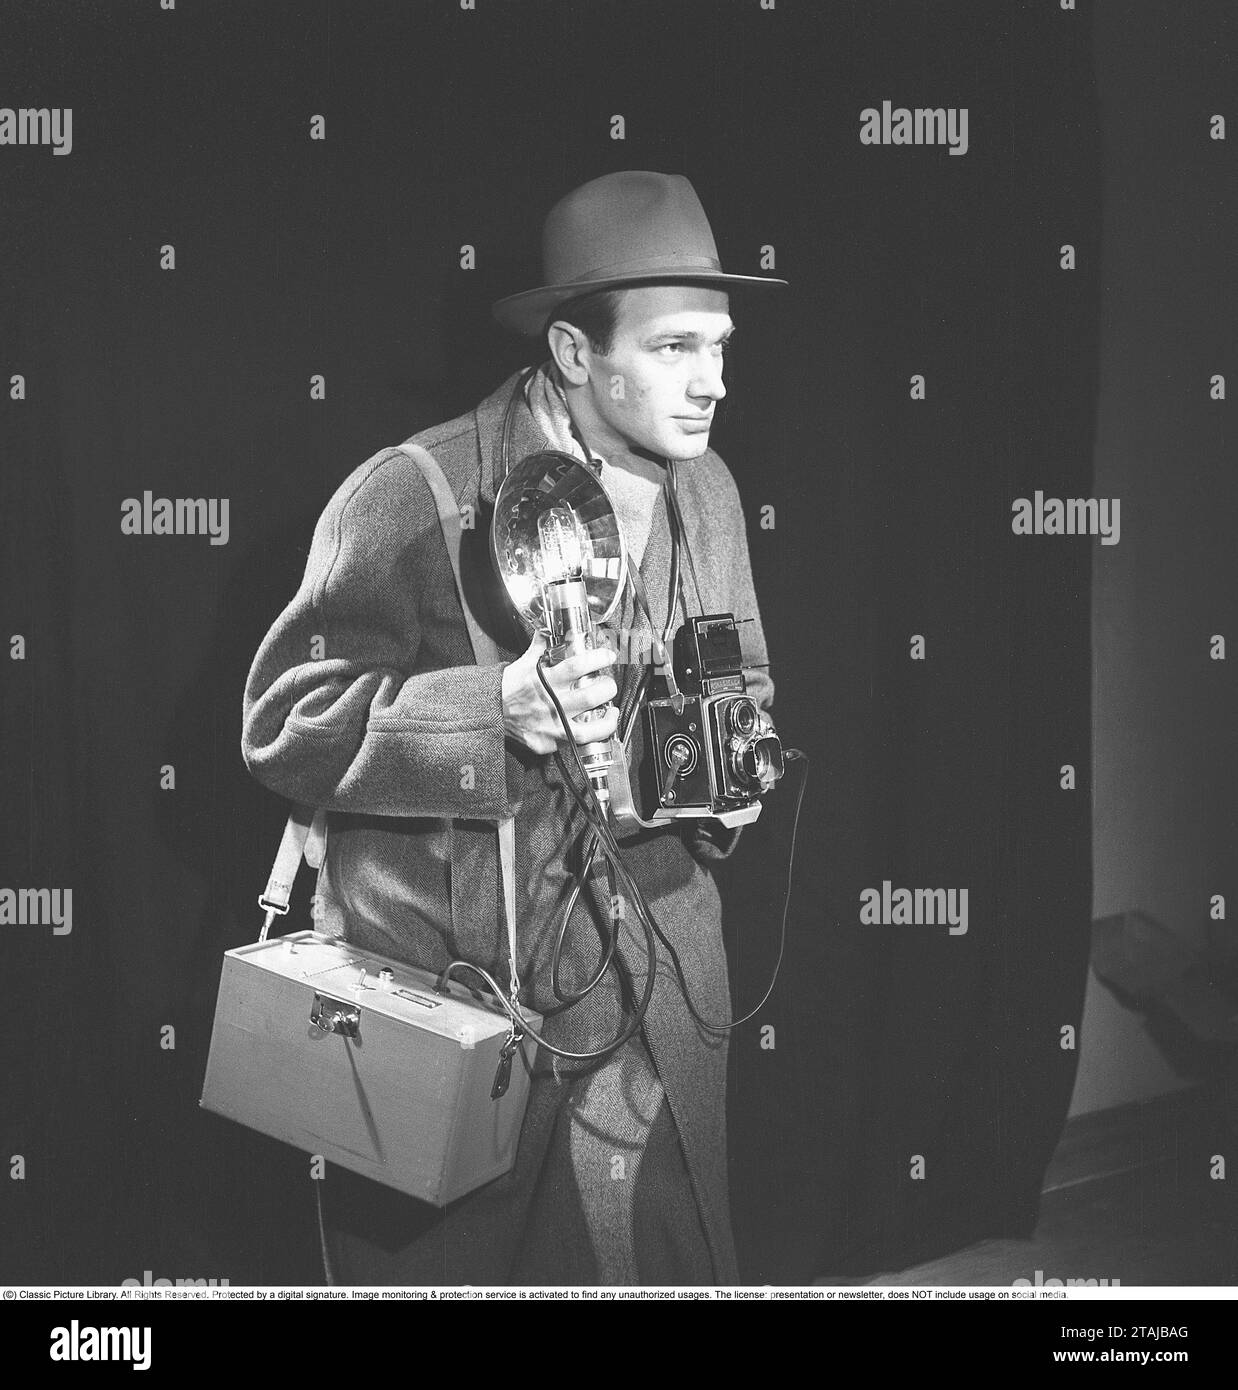 Karl-Gustaf Kristoffersson , 1918-2011 , Legendary Swedish photographer here with the Rolleiflex camera hanging around his neck and a flash unit that effectively illuminated the subjects. Sweden 1947. ref Z42-6 Stock Photo